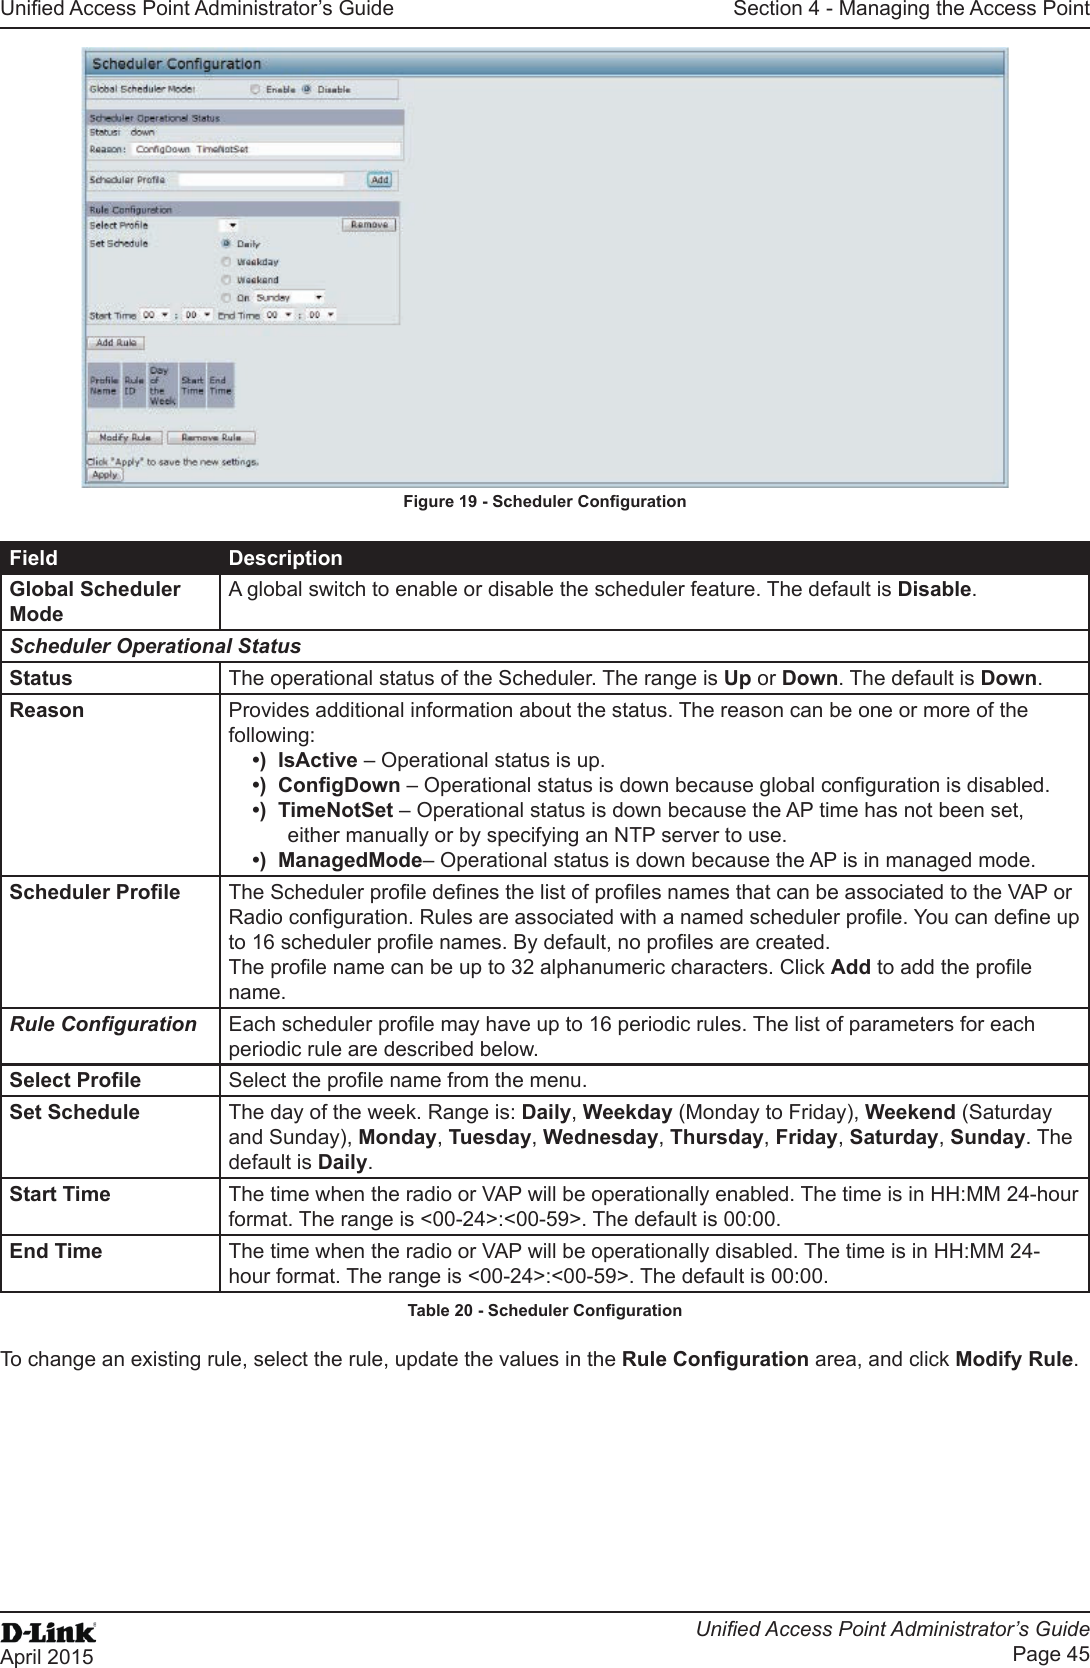 Unied Access Point Administrator’s GuideUnied Access Point Administrator’s GuidePage 45April 2015Section 4 - Managing the Access PointFigure 19 - Scheduler CongurationField DescriptionGlobal Scheduler ModeA global switch to enable or disable the scheduler feature. The default is Disable.Scheduler Operational StatusStatus The operational status of the Scheduler. The range is Up or Down. The default is Down.Reason Provides additional information about the status. The reason can be one or more of the following:•)  IsActive – Operational status is up.•)  CongDown – Operational status is down because global conguration is disabled.•)  TimeNotSet – Operational status is down because the AP time has not been set, either manually or by specifying an NTP server to use.•)  ManagedMode– Operational status is down because the AP is in managed mode.Scheduler Prole The Scheduler prole denes the list of proles names that can be associated to the VAP or Radio conguration. Rules are associated with a named scheduler prole. You can dene up to 16 scheduler prole names. By default, no proles are created.The prole name can be up to 32 alphanumeric characters. Click Add to add the prole name.Rule Conguration Each scheduler prole may have up to 16 periodic rules. The list of parameters for each periodic rule are described below.Select Prole Select the prole name from the menu.Set Schedule The day of the week. Range is: Daily, Weekday (Monday to Friday), Weekend (Saturday and Sunday), Monday, Tuesday, Wednesday, Thursday, Friday, Saturday, Sunday. The default is Daily.Start Time The time when the radio or VAP will be operationally enabled. The time is in HH:MM 24-hour format. The range is &lt;00-24&gt;:&lt;00-59&gt;. The default is 00:00.End Time The time when the radio or VAP will be operationally disabled. The time is in HH:MM 24-hour format. The range is &lt;00-24&gt;:&lt;00-59&gt;. The default is 00:00.Table 20 - Scheduler CongurationTo change an existing rule, select the rule, update the values in the Rule Conguration area, and click Modify Rule.